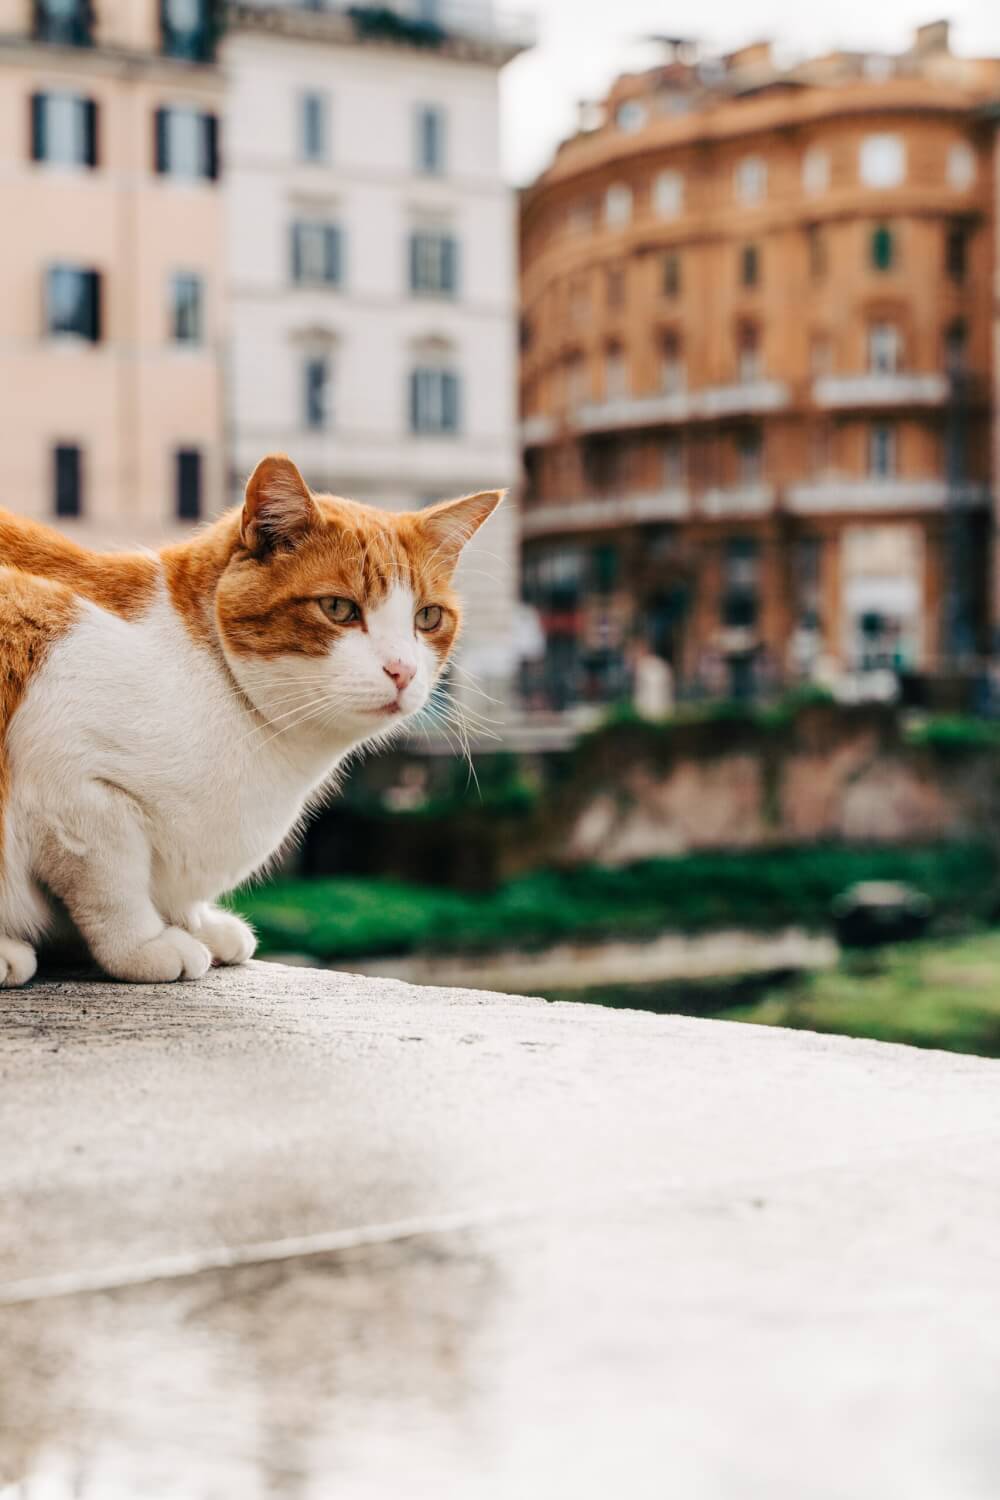 Orange and white cat sitting on concrete with buildings in the background.